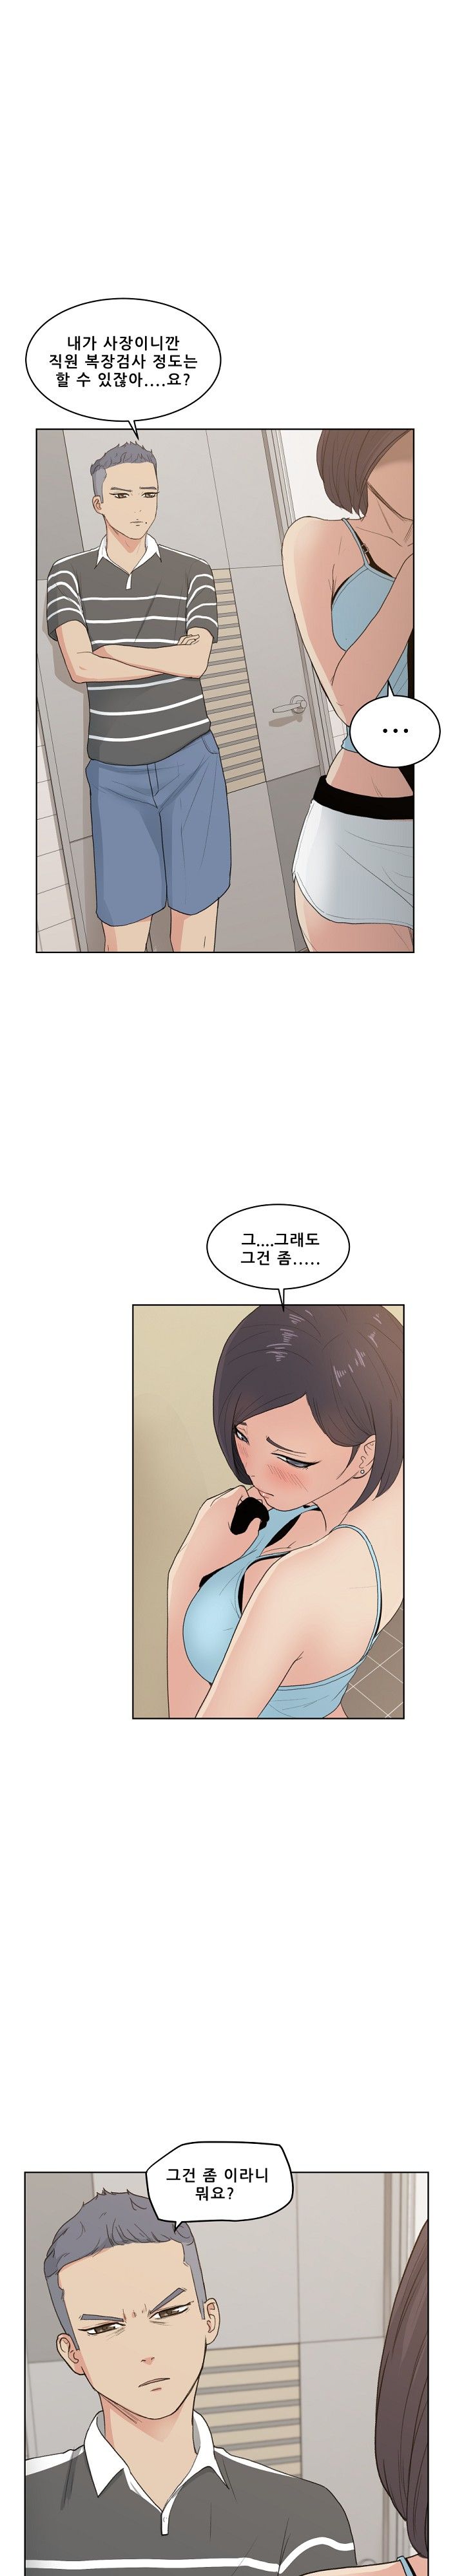 Sooyung Comic Shop Raw - Chapter 4 Page 2